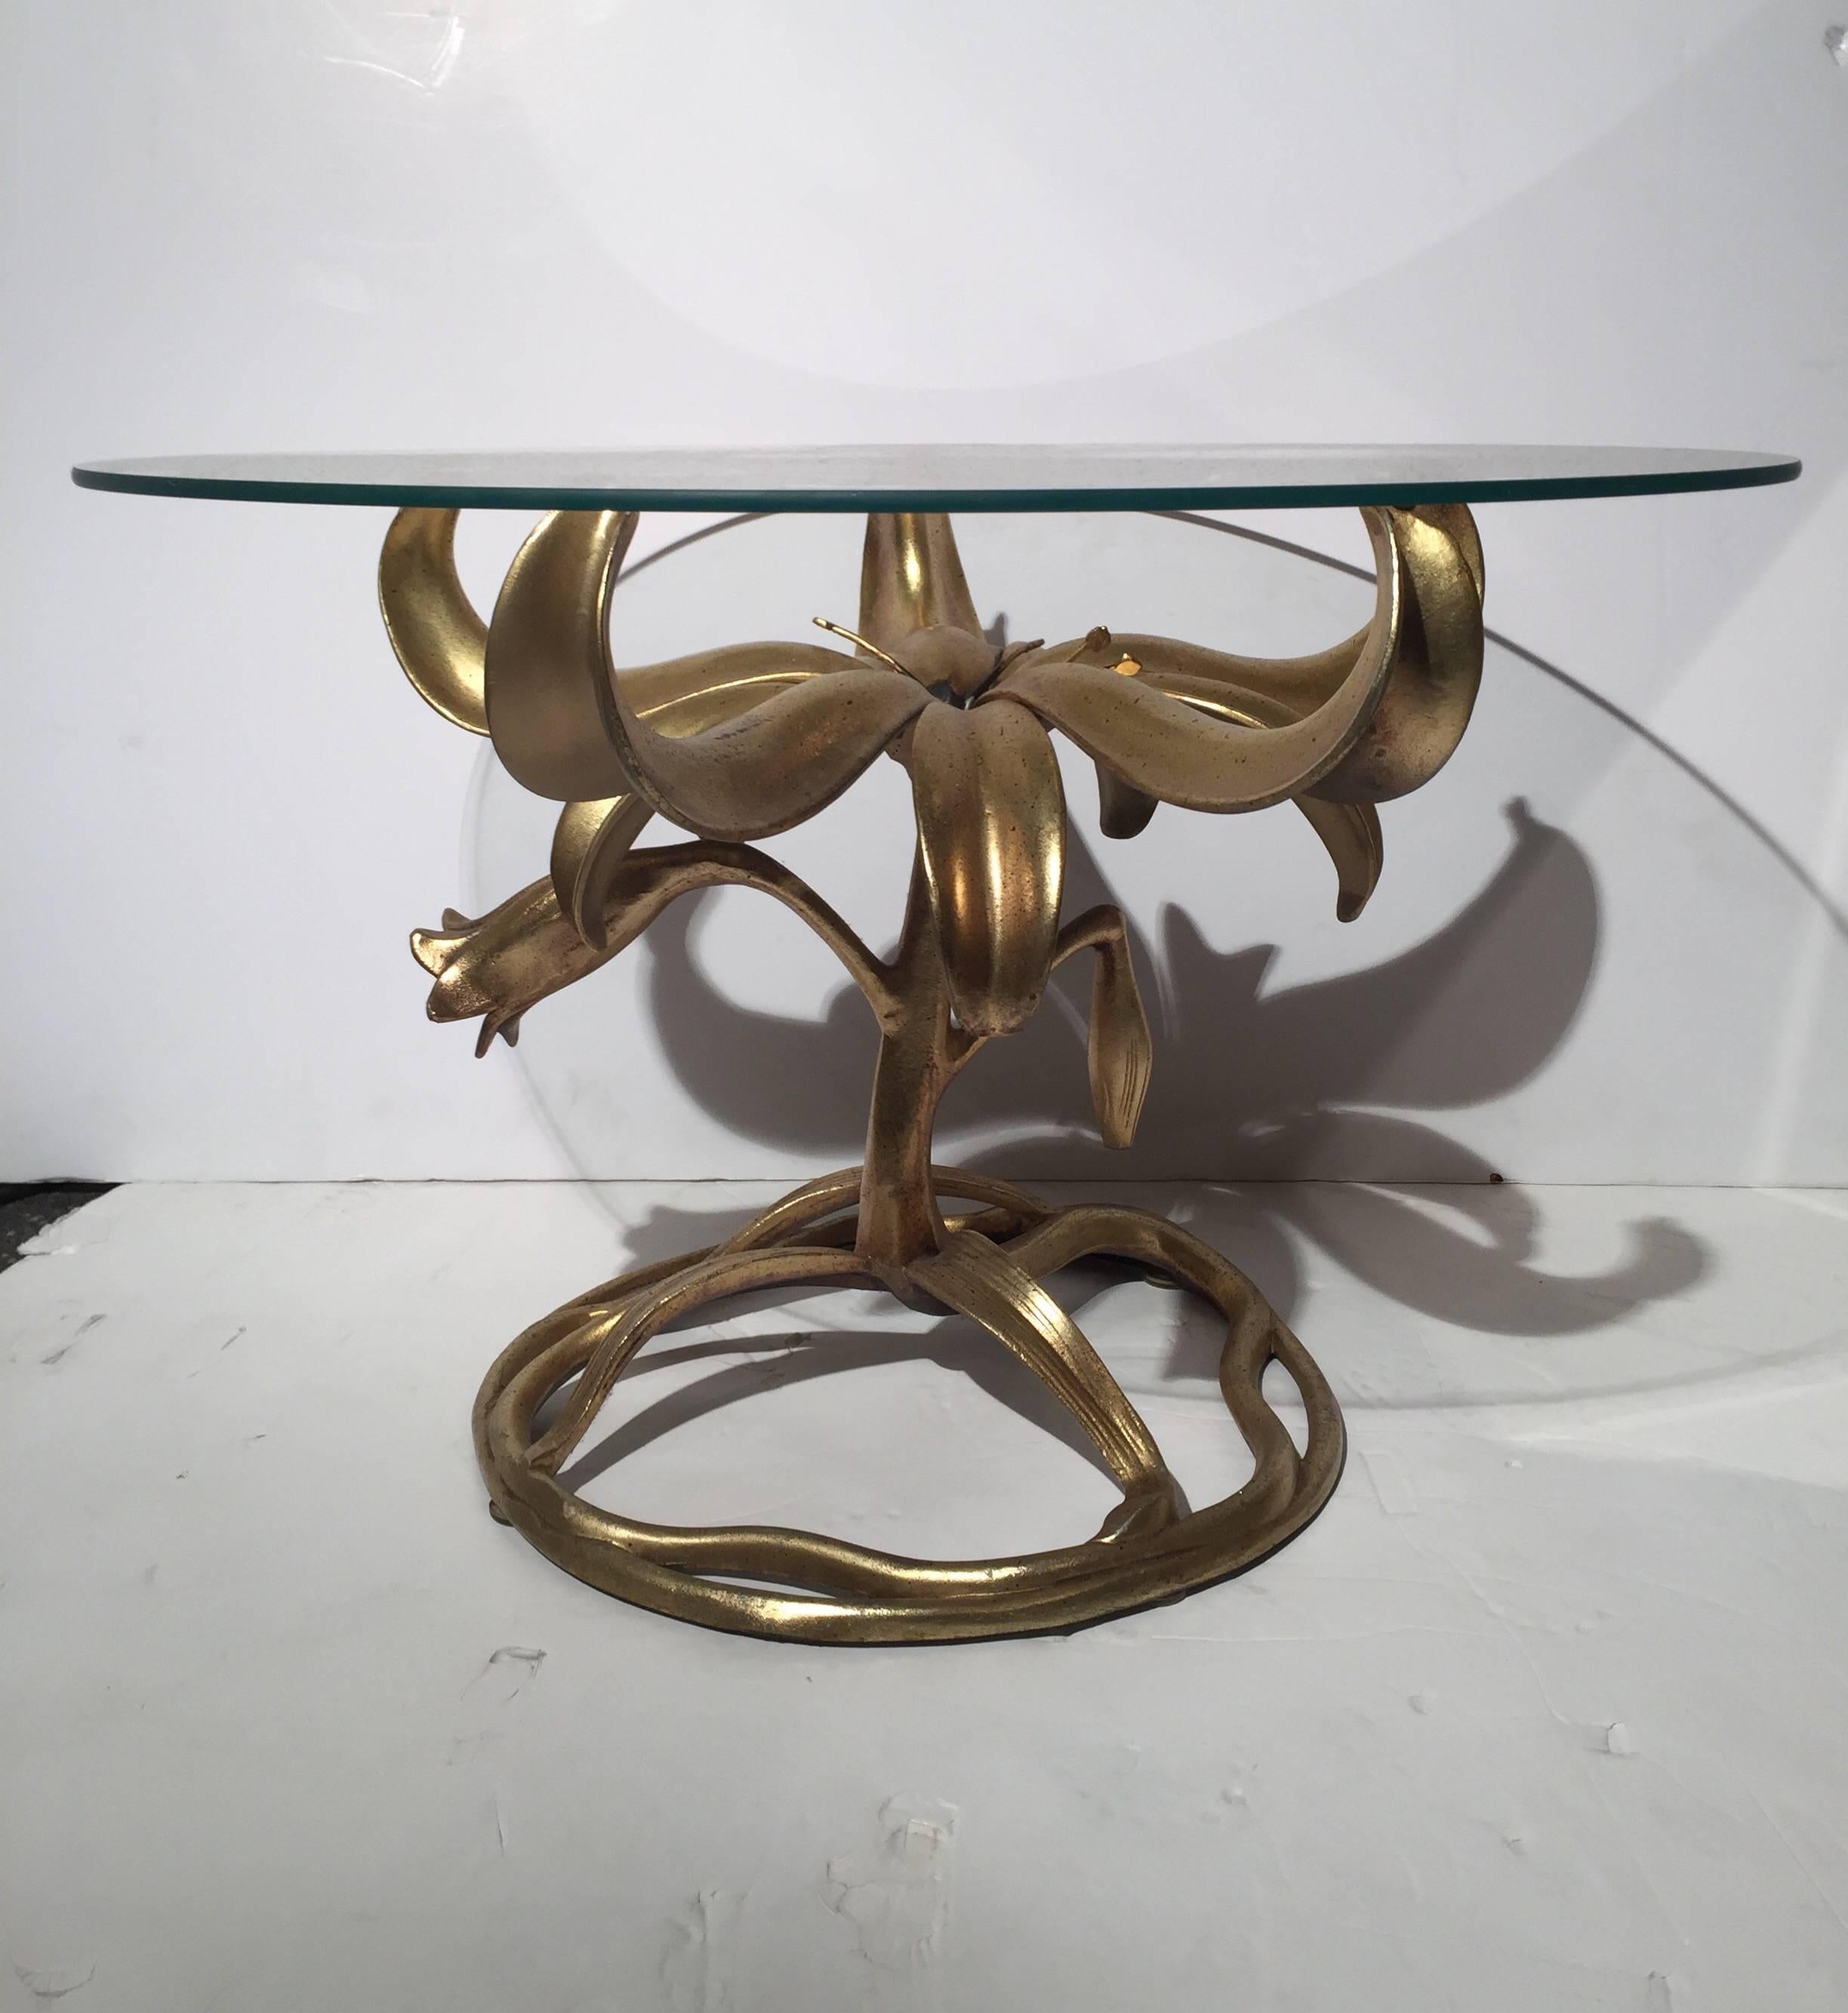 Whimsical gilded lily decorator side table by Arthur Court. The beautifully sculpted base with glass top.